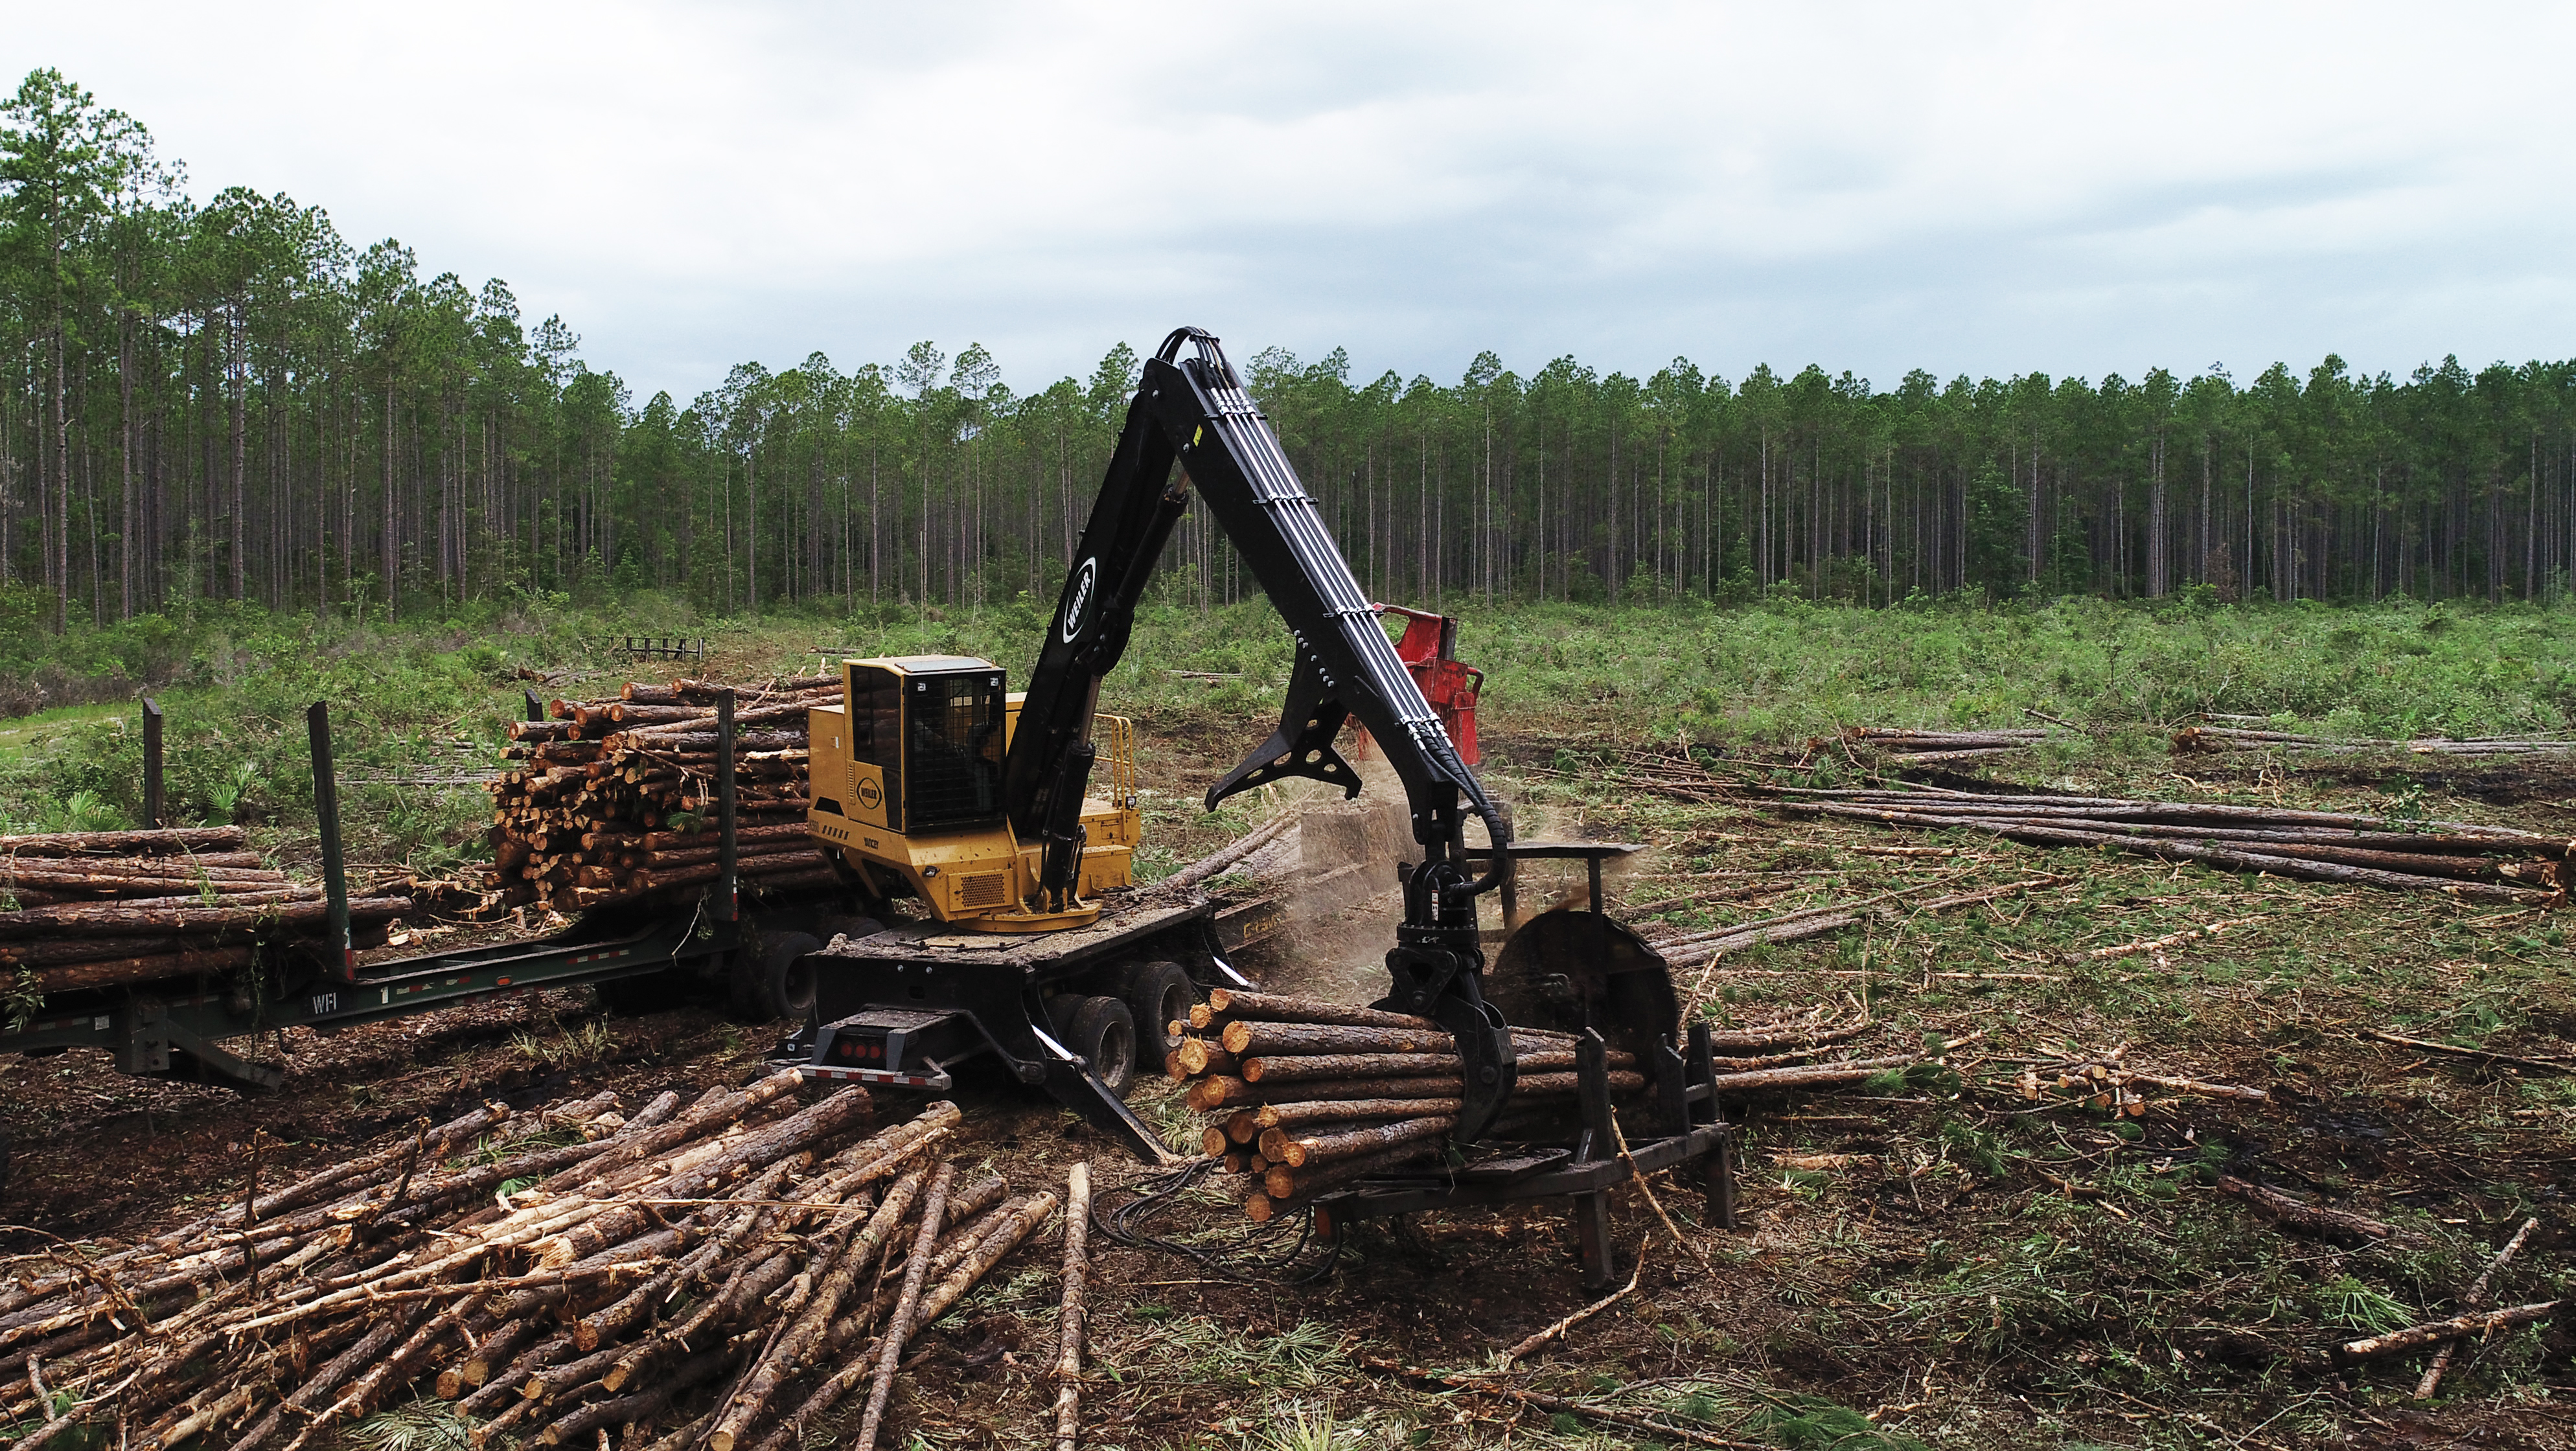 Ring Power will distribute and provide parts and service support for Weiler's full-line of purpose-built forestry products.